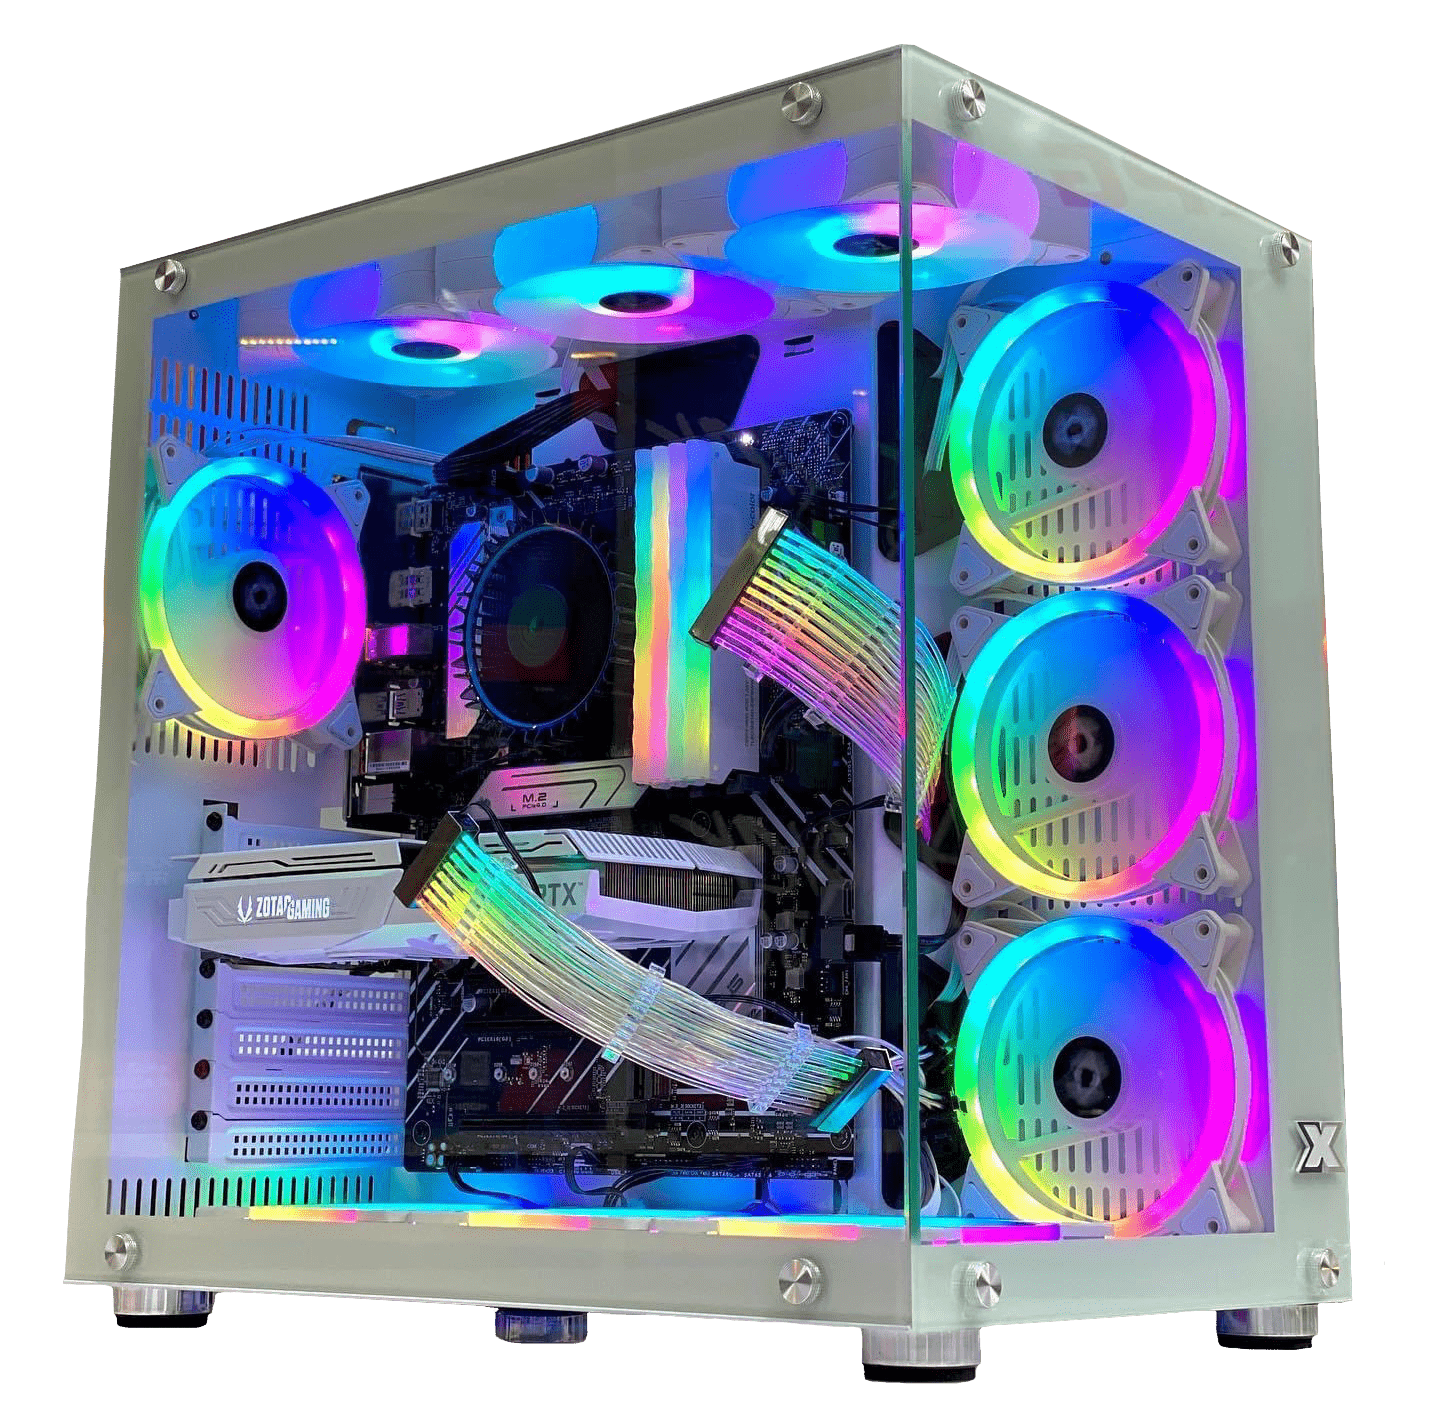 pre built gaming pc gaming pc price in pakistan average gaming pc price in pakistan best gaming pc price in pakistan